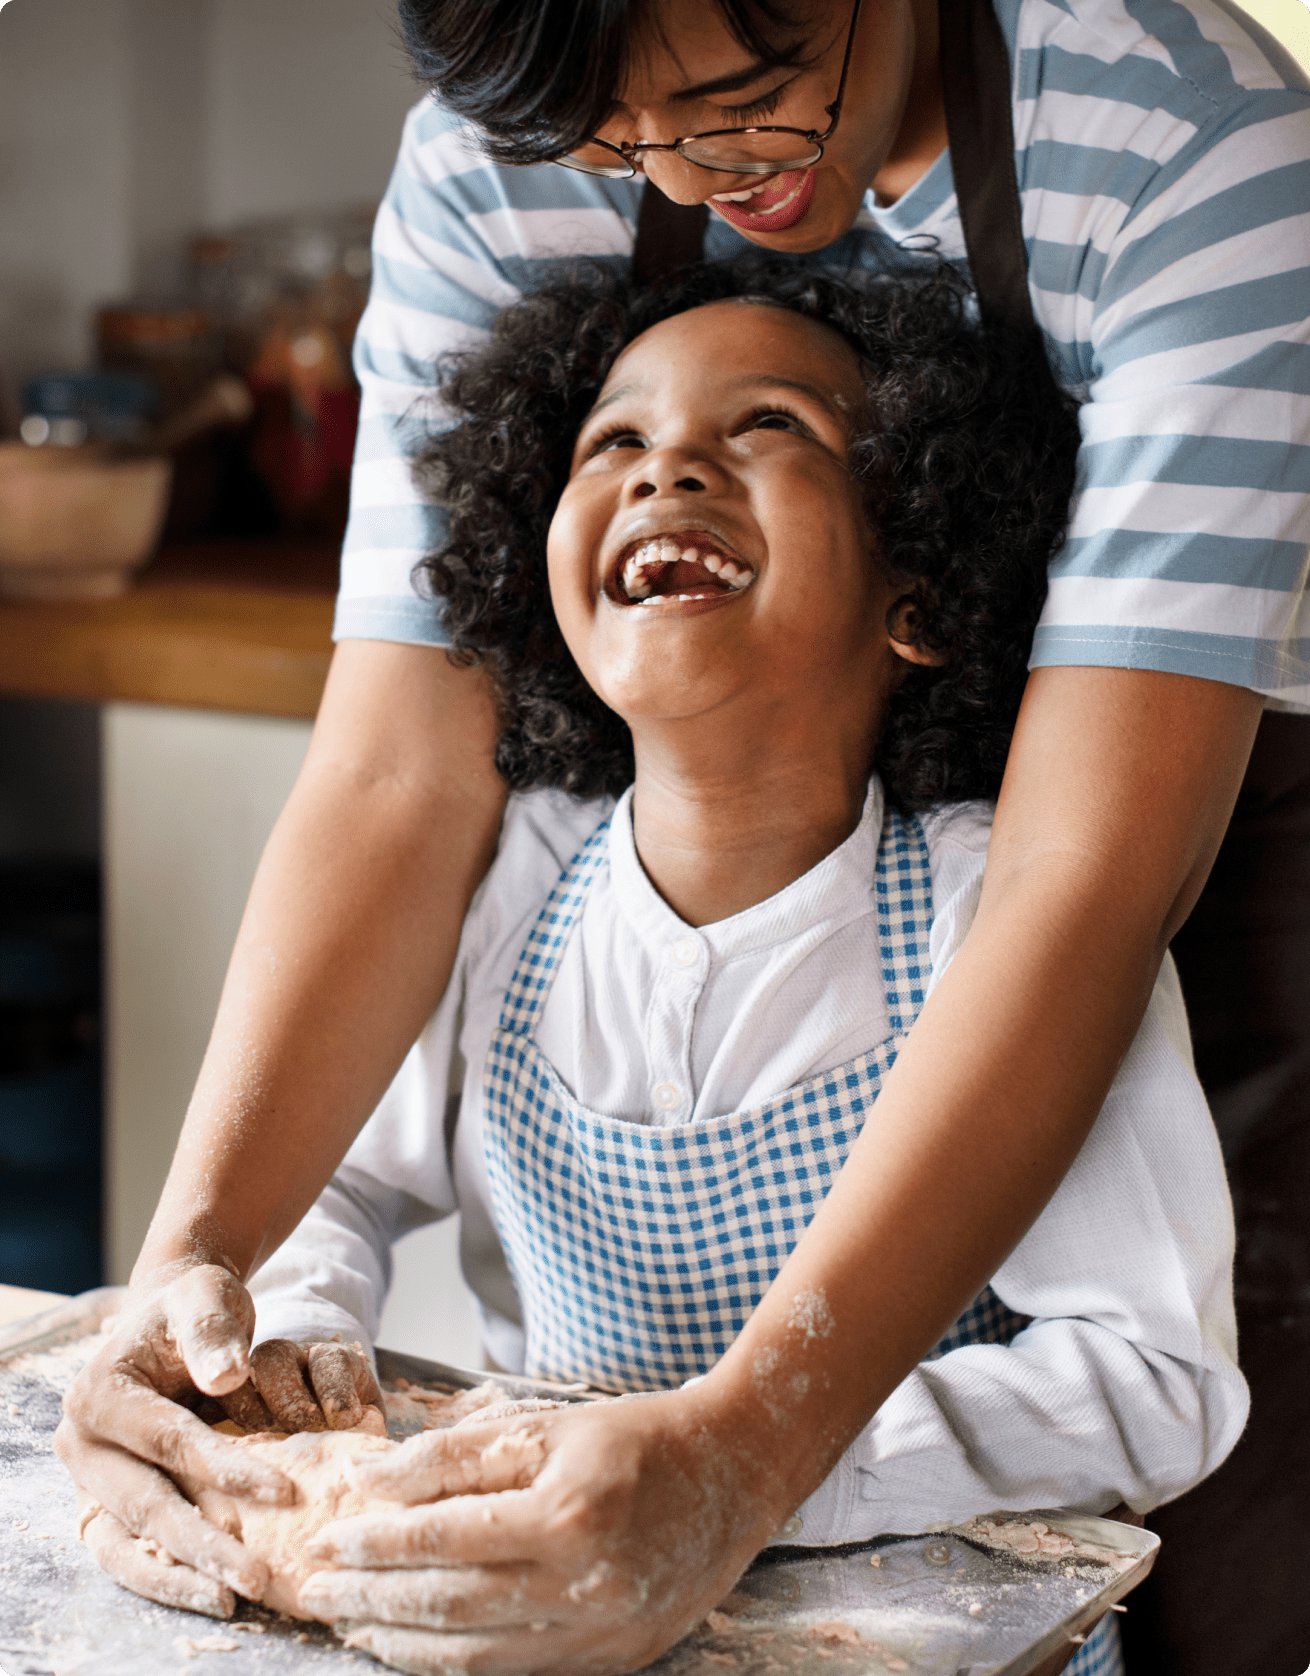 Close up of kid laughing while making dough with father